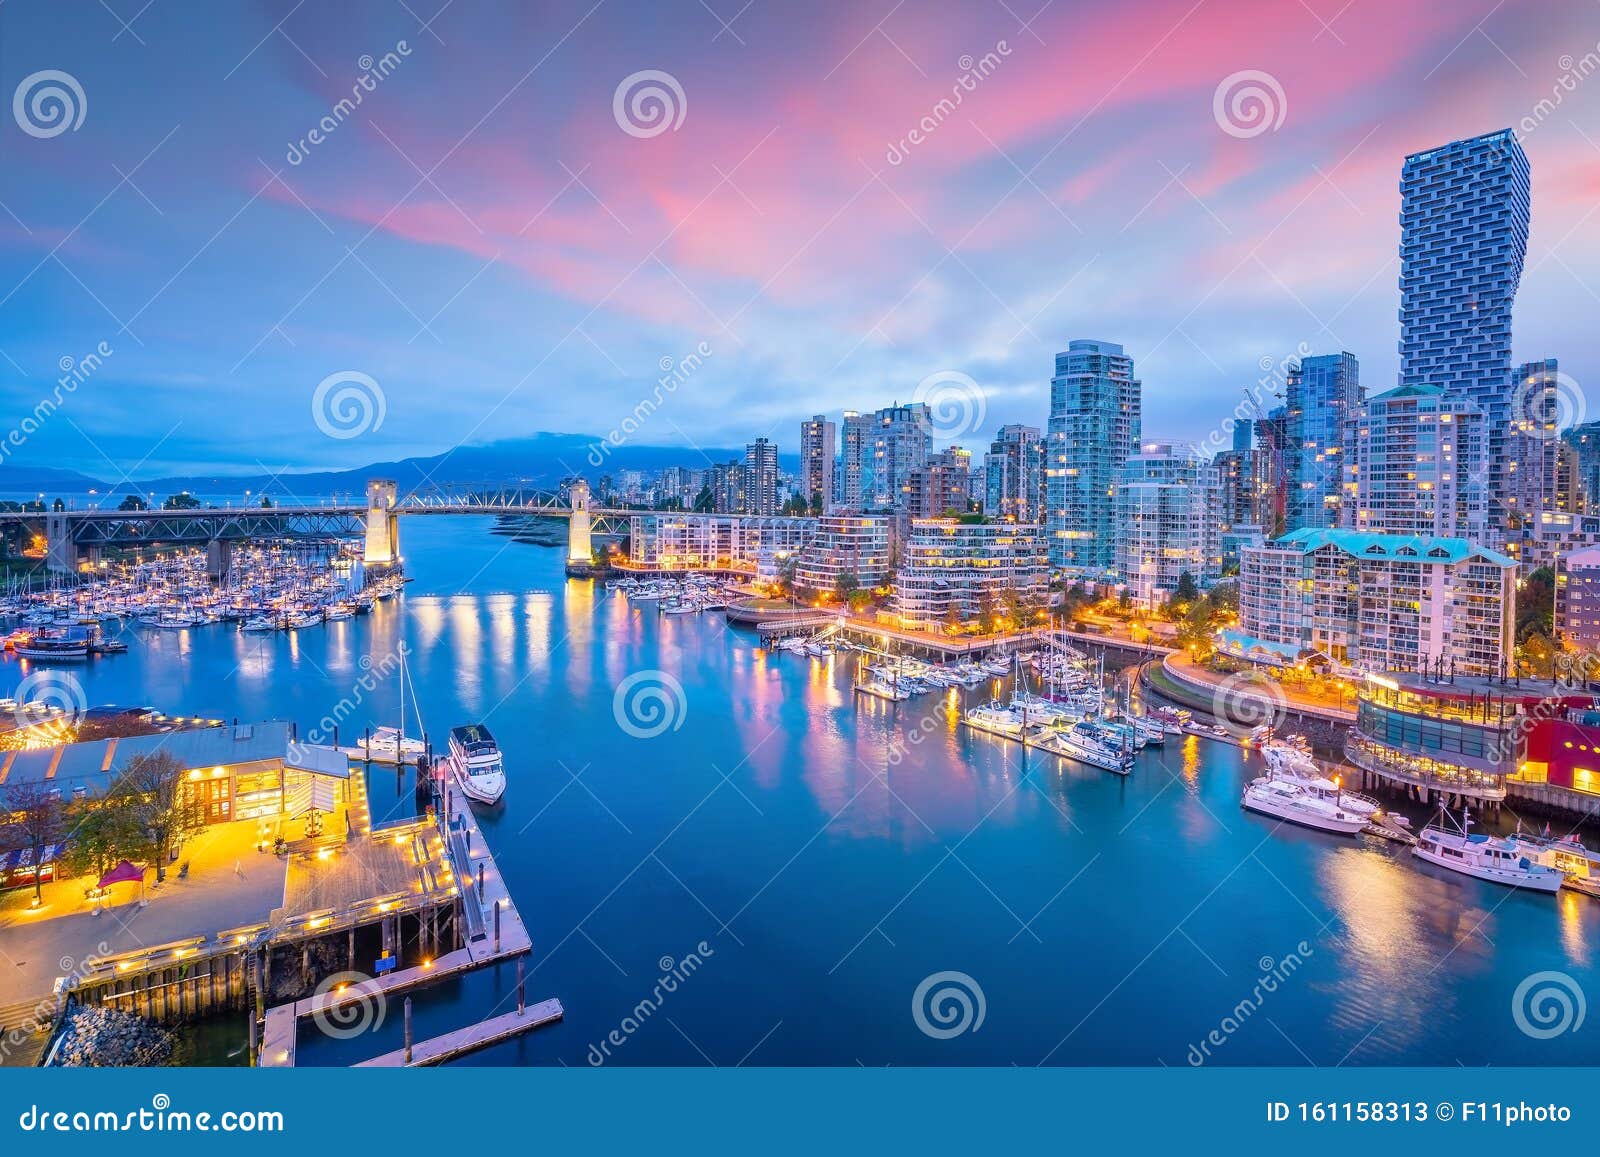 beautiful view of downtown vancouver skyline, british columbia, canada